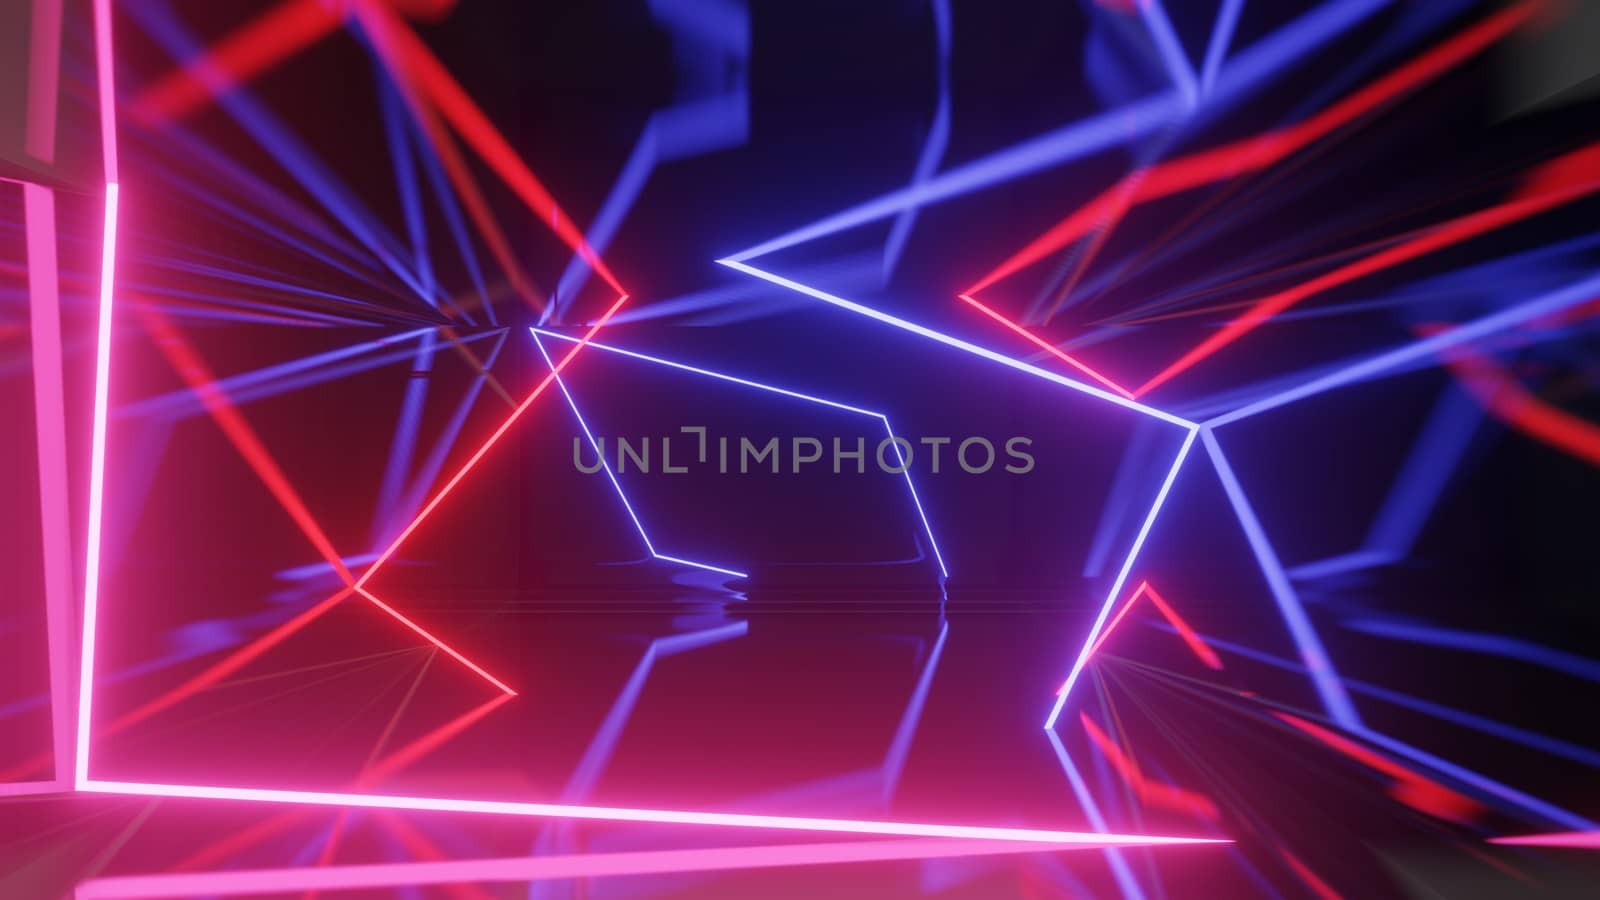 Mock up background/backdrop in minimal modern illustration design of neon light for product placement by bkneung